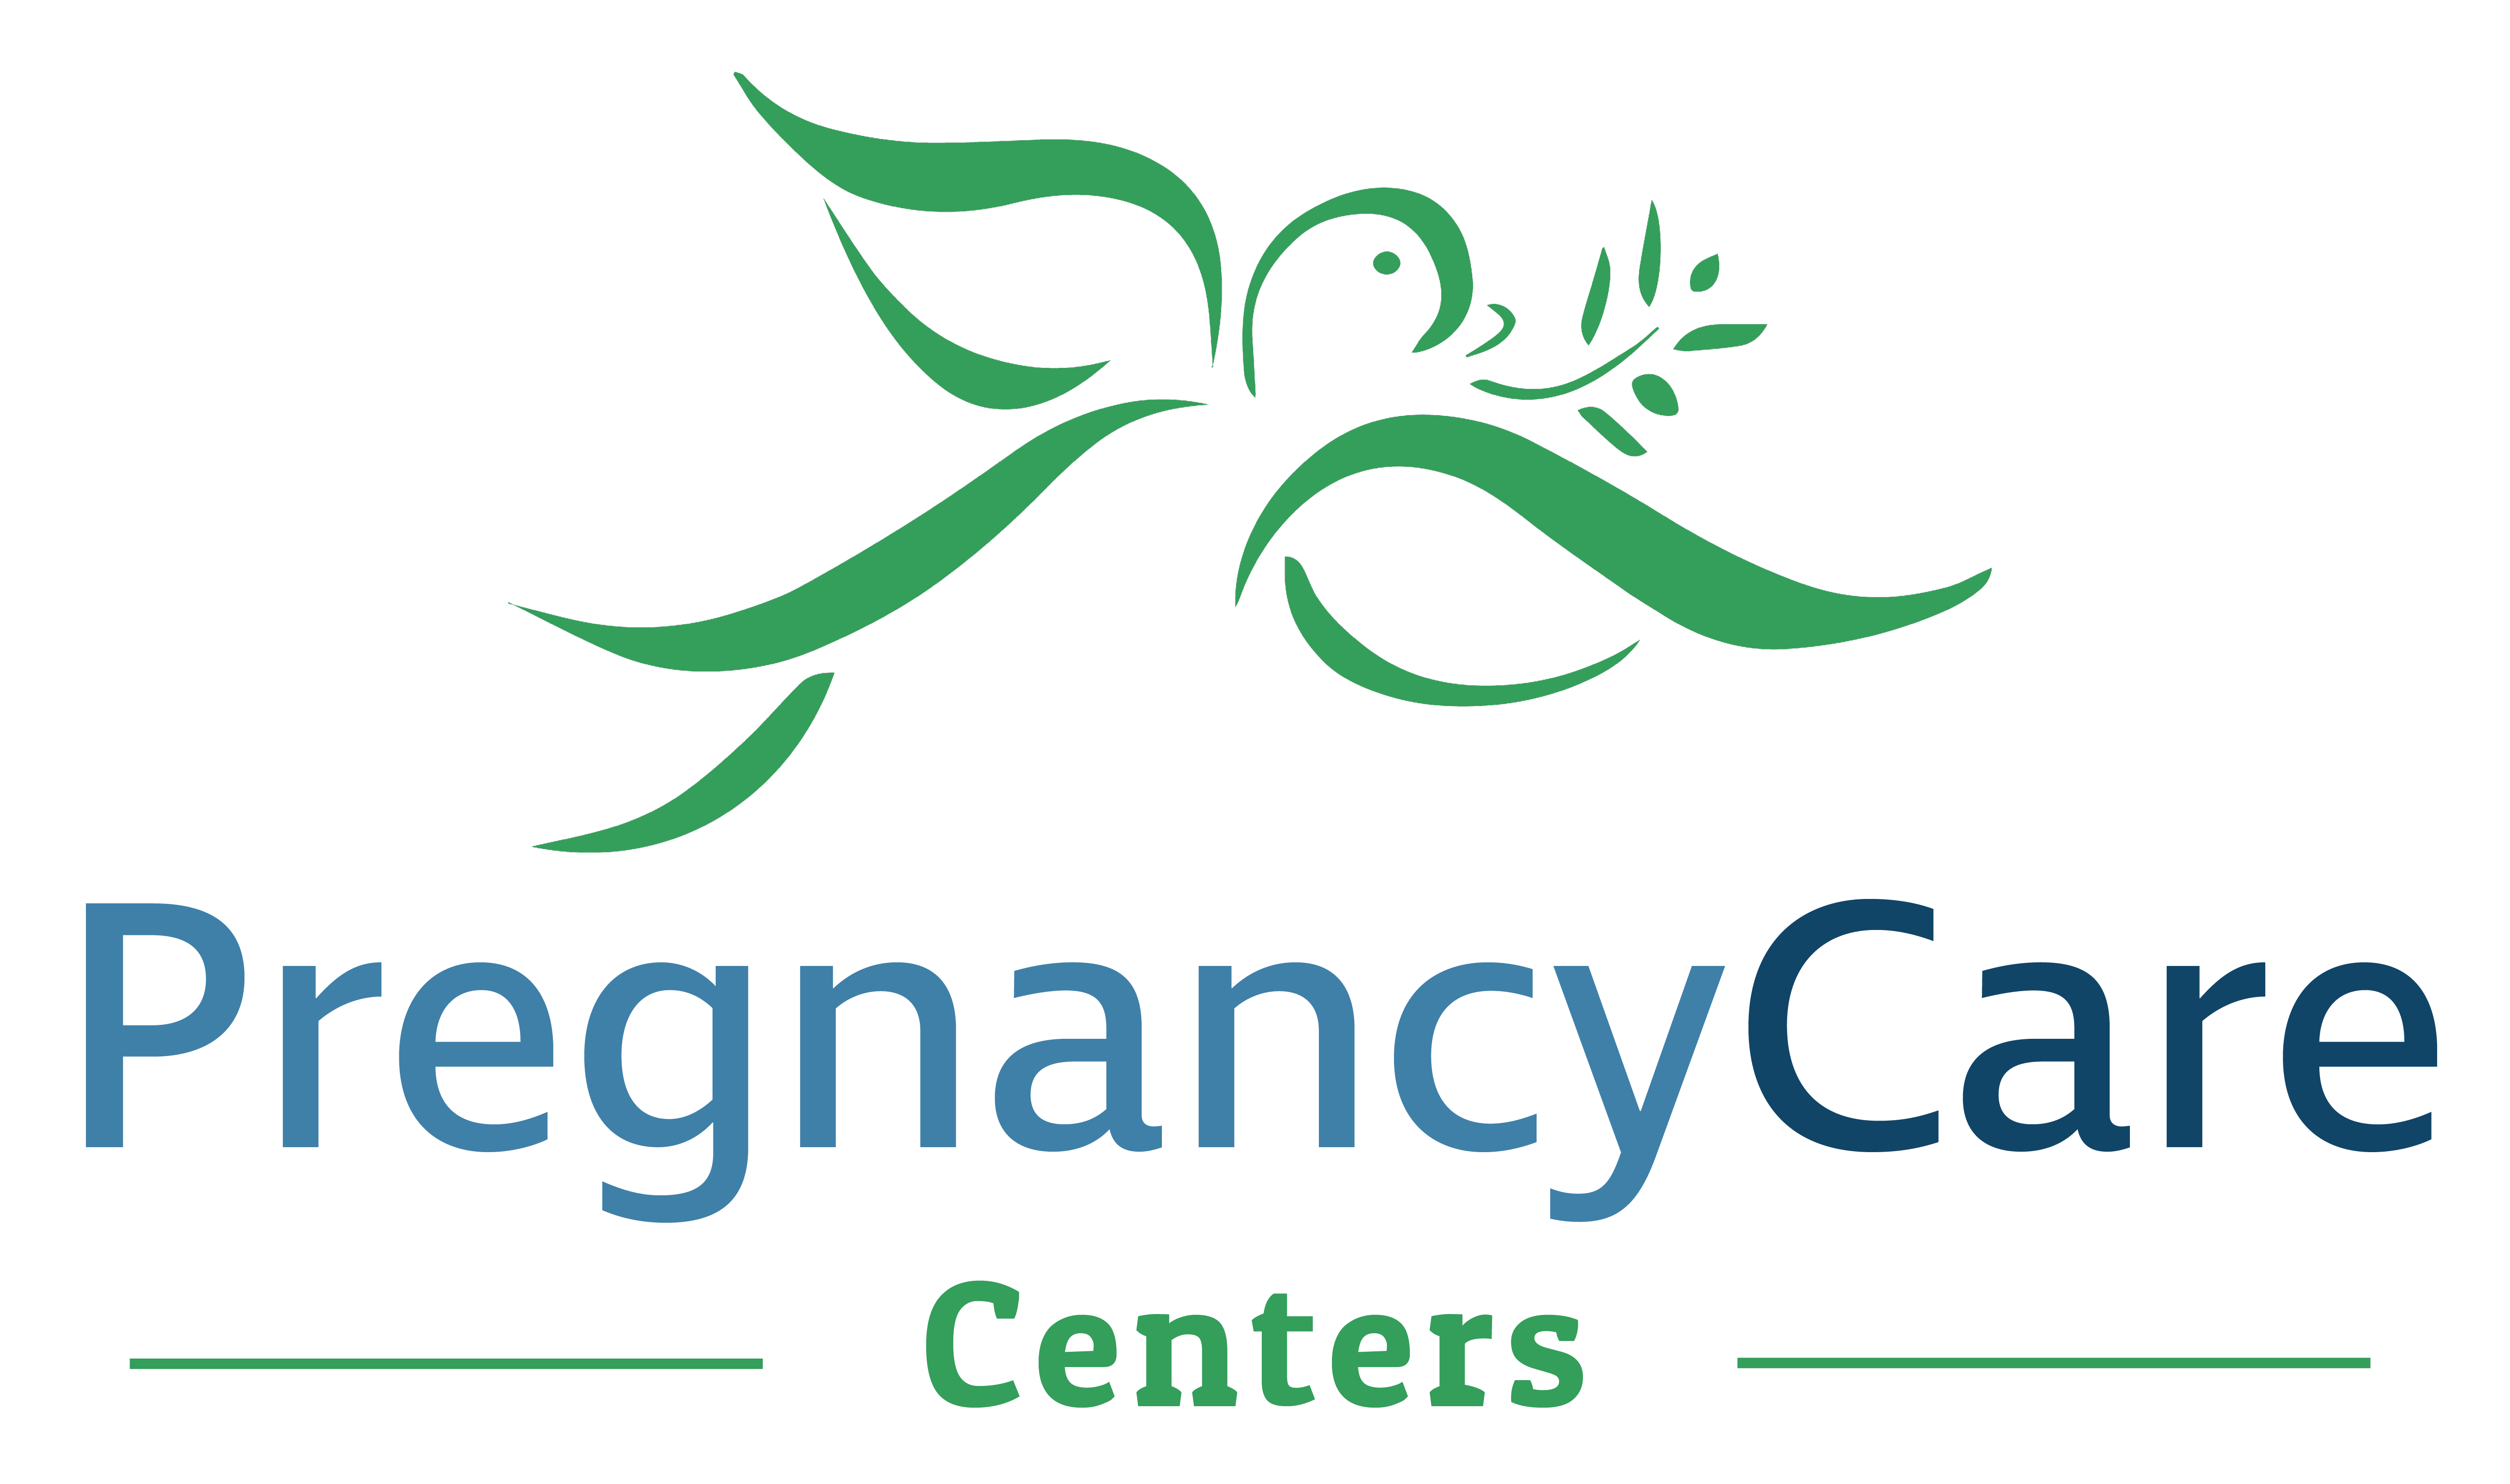 Pregnancy Care Centers in Canby, Oregon